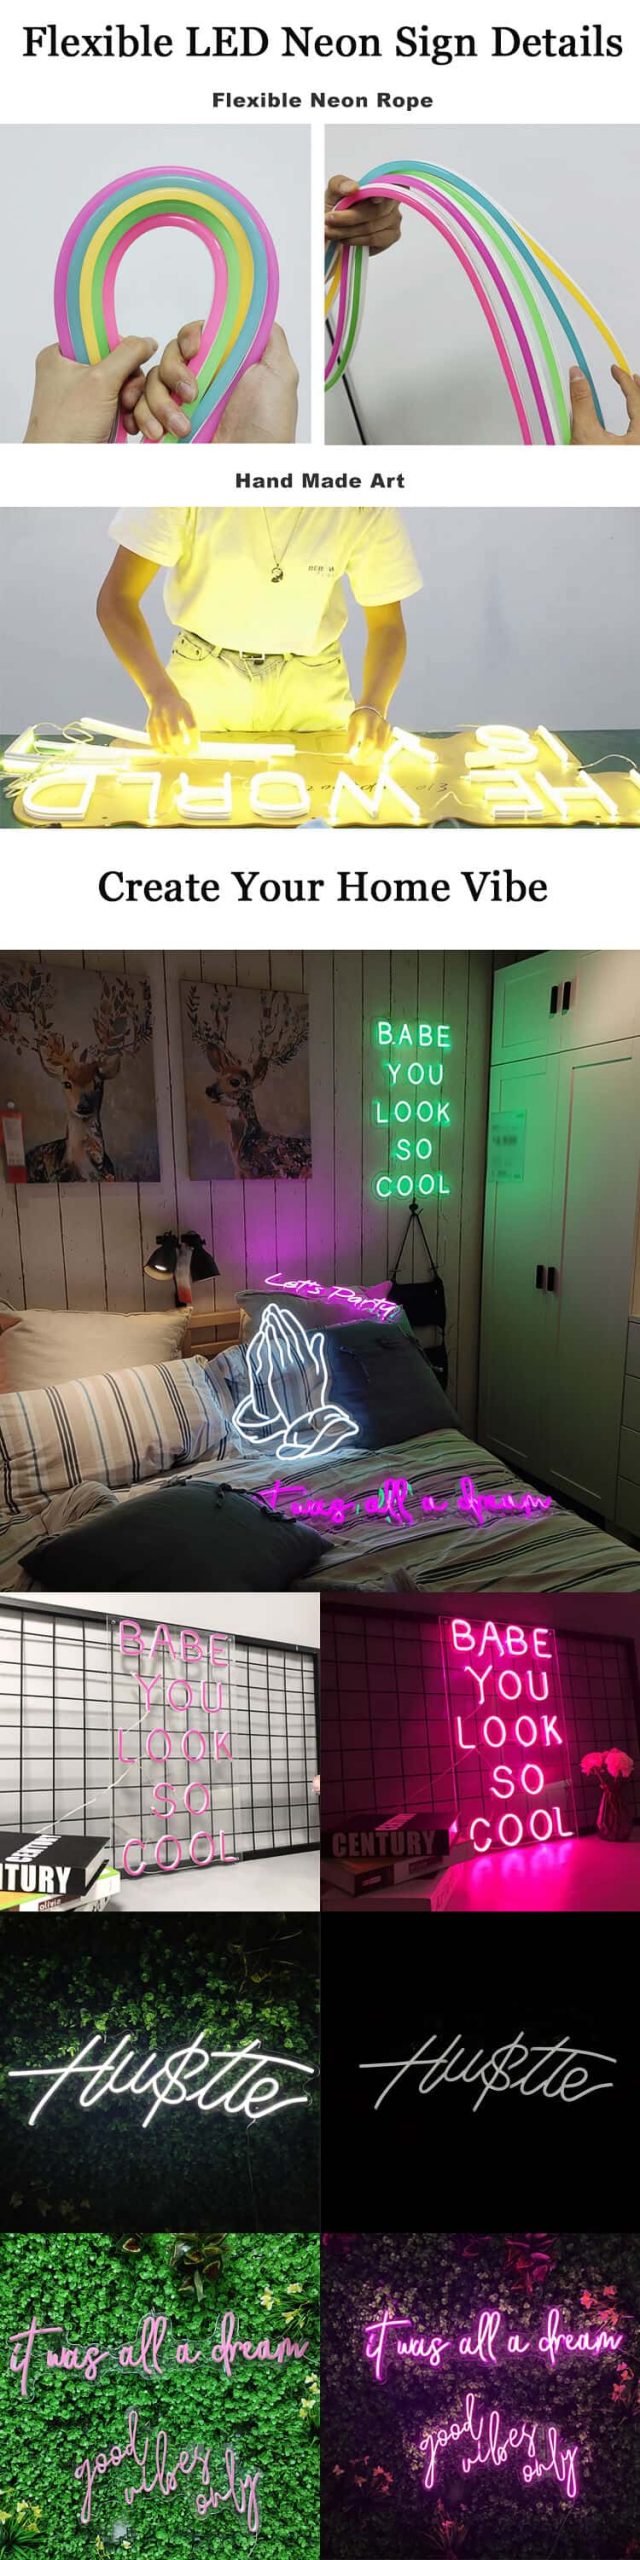 Custom Flexible LED Neon Wedding Signs Product Details